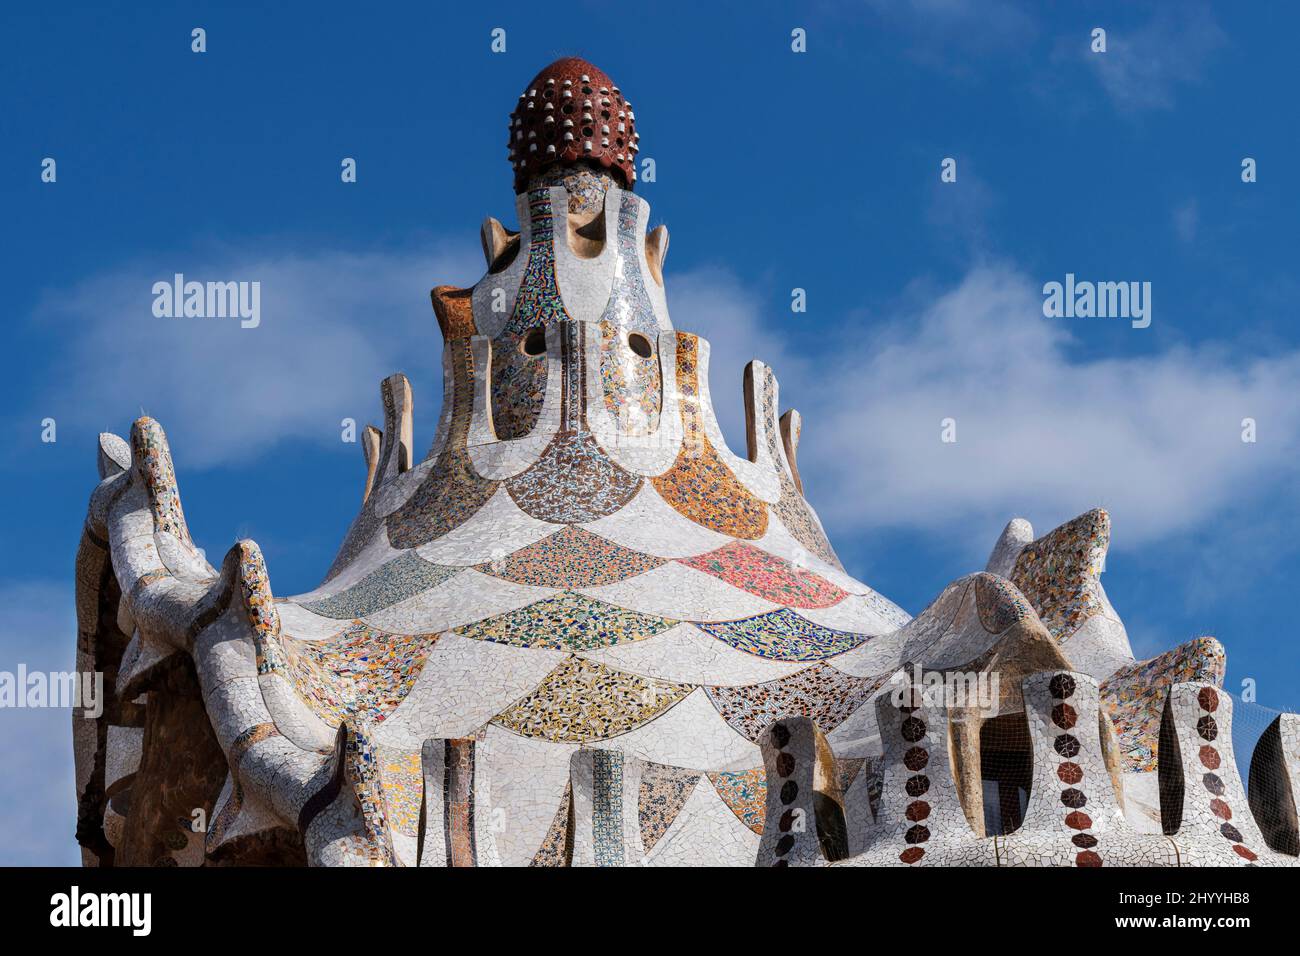 PARK GUELL BARCELONA CATALONIA SPAIN COLOURFUL GAUDI MOSAICS ON THE ROOF OF THE PORTERS LODGE BUILDING Stock Photo